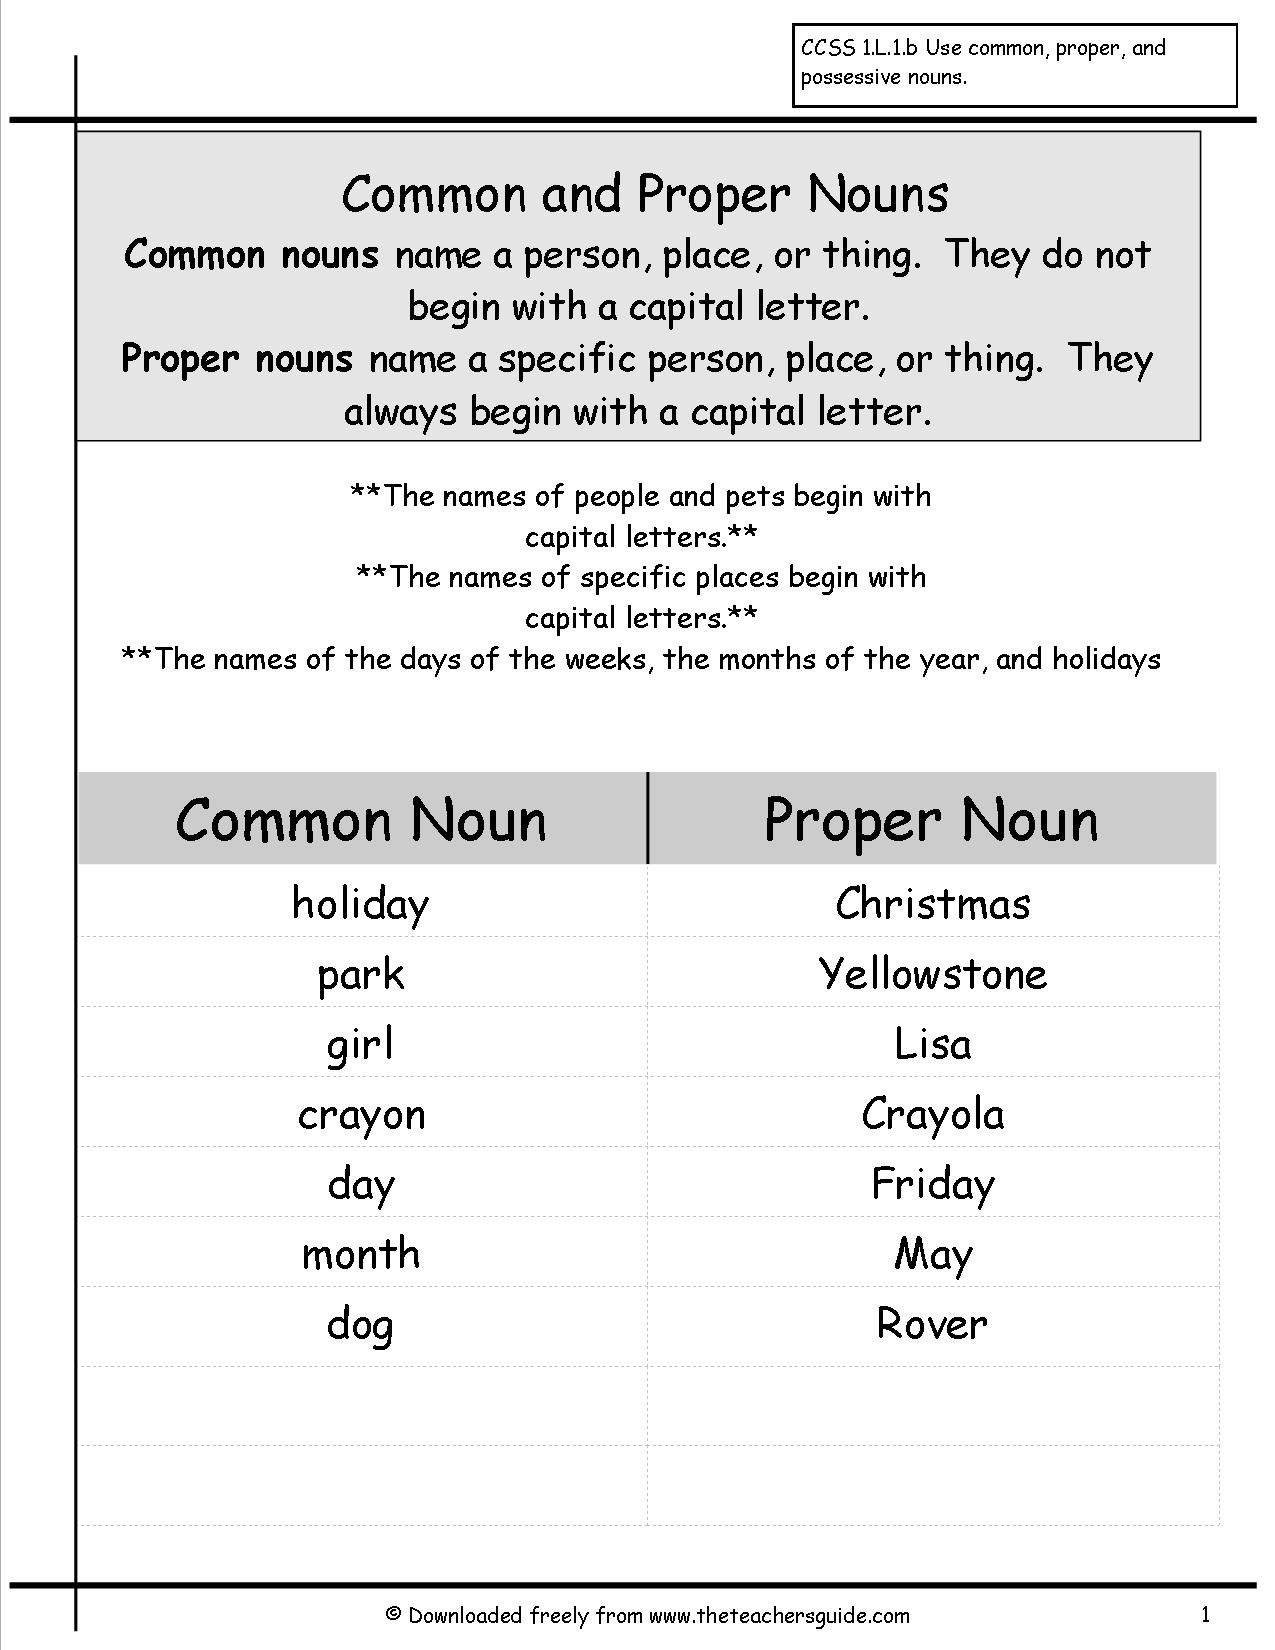 crafting-connections-anchors-away-monday-common-and-proper-nouns-freebie-included